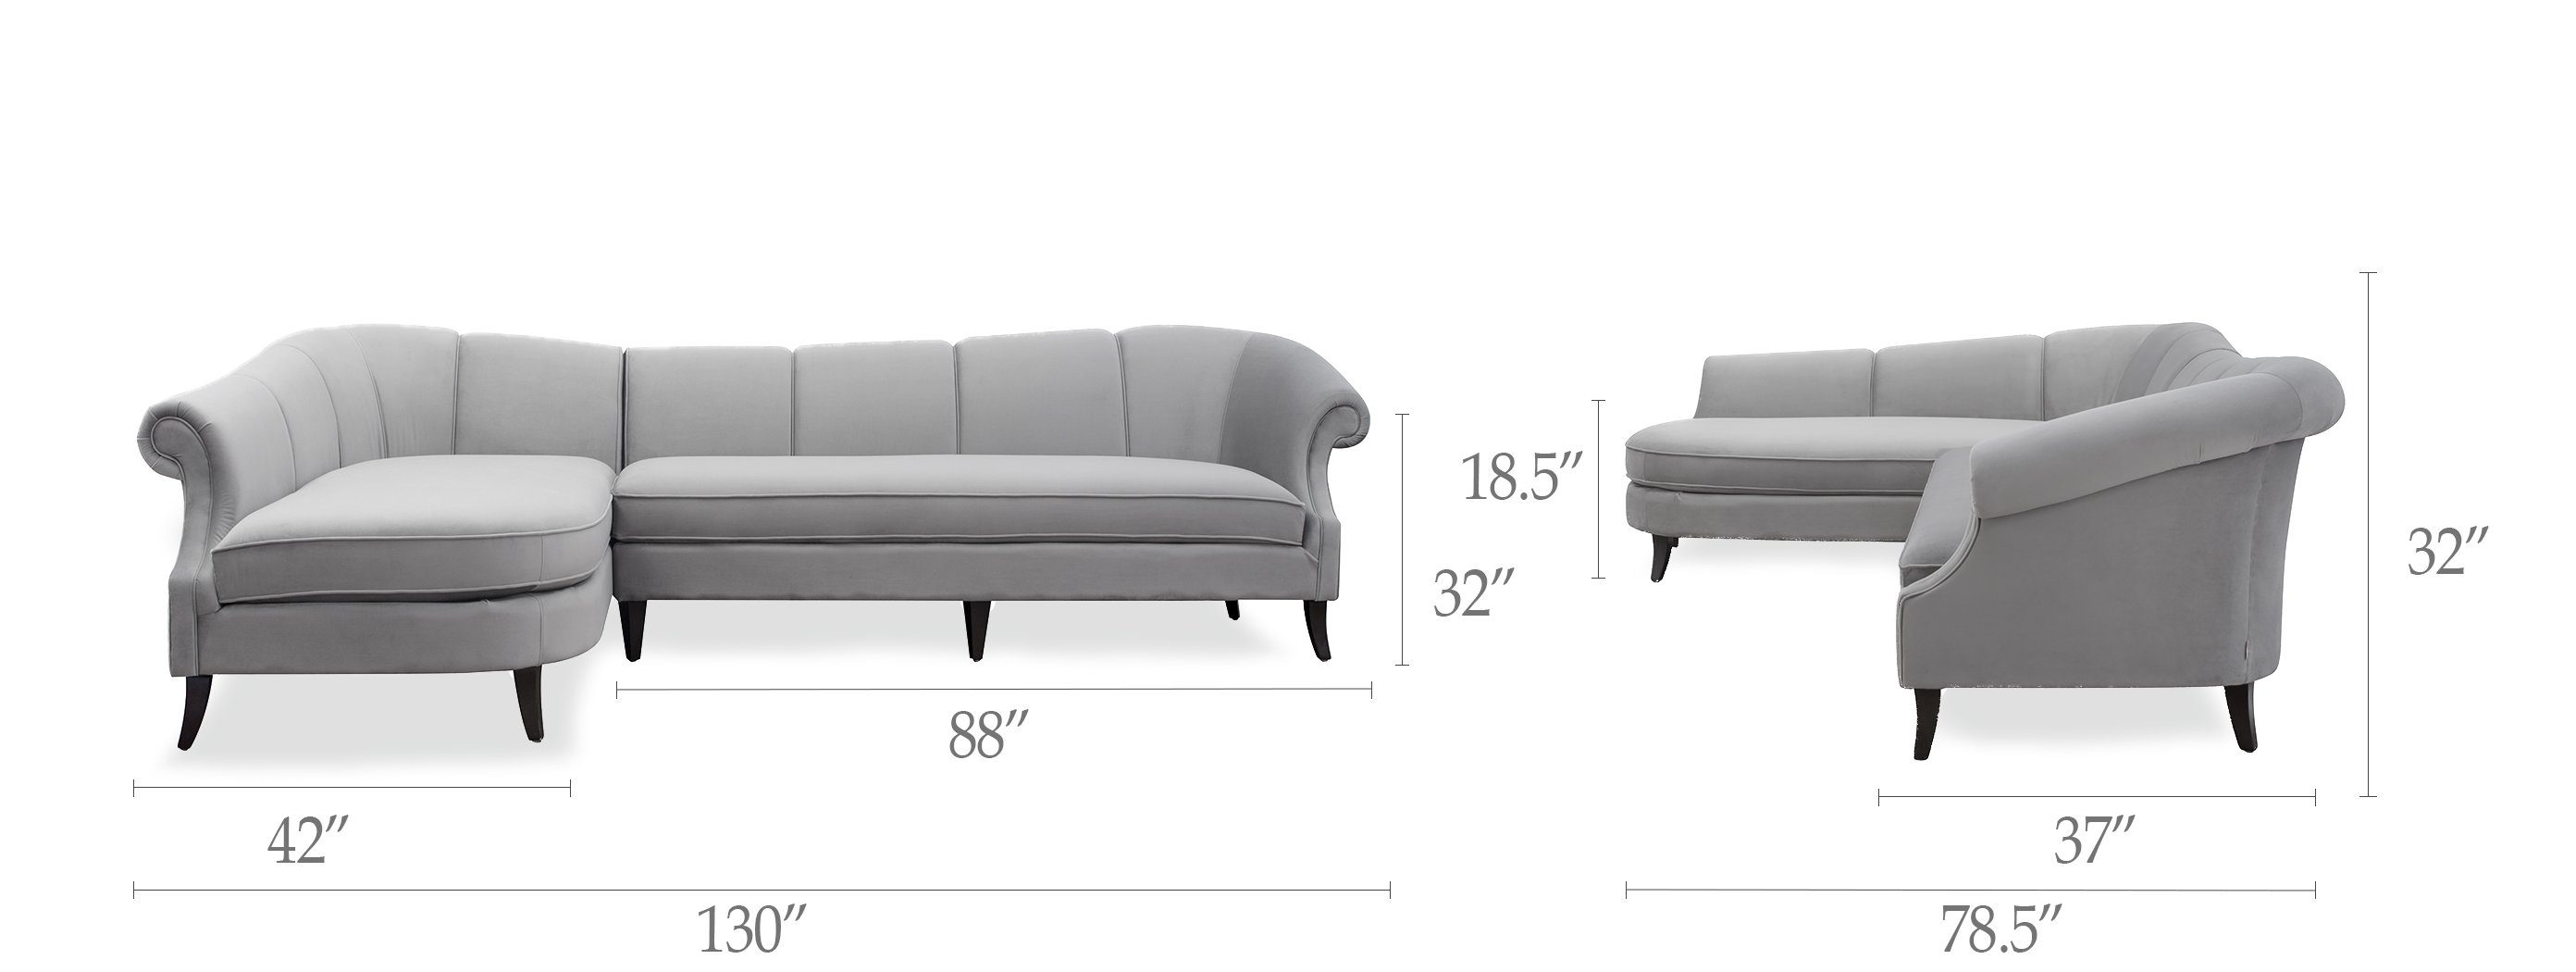 Victoria Upholstered Left Sectional Sofa